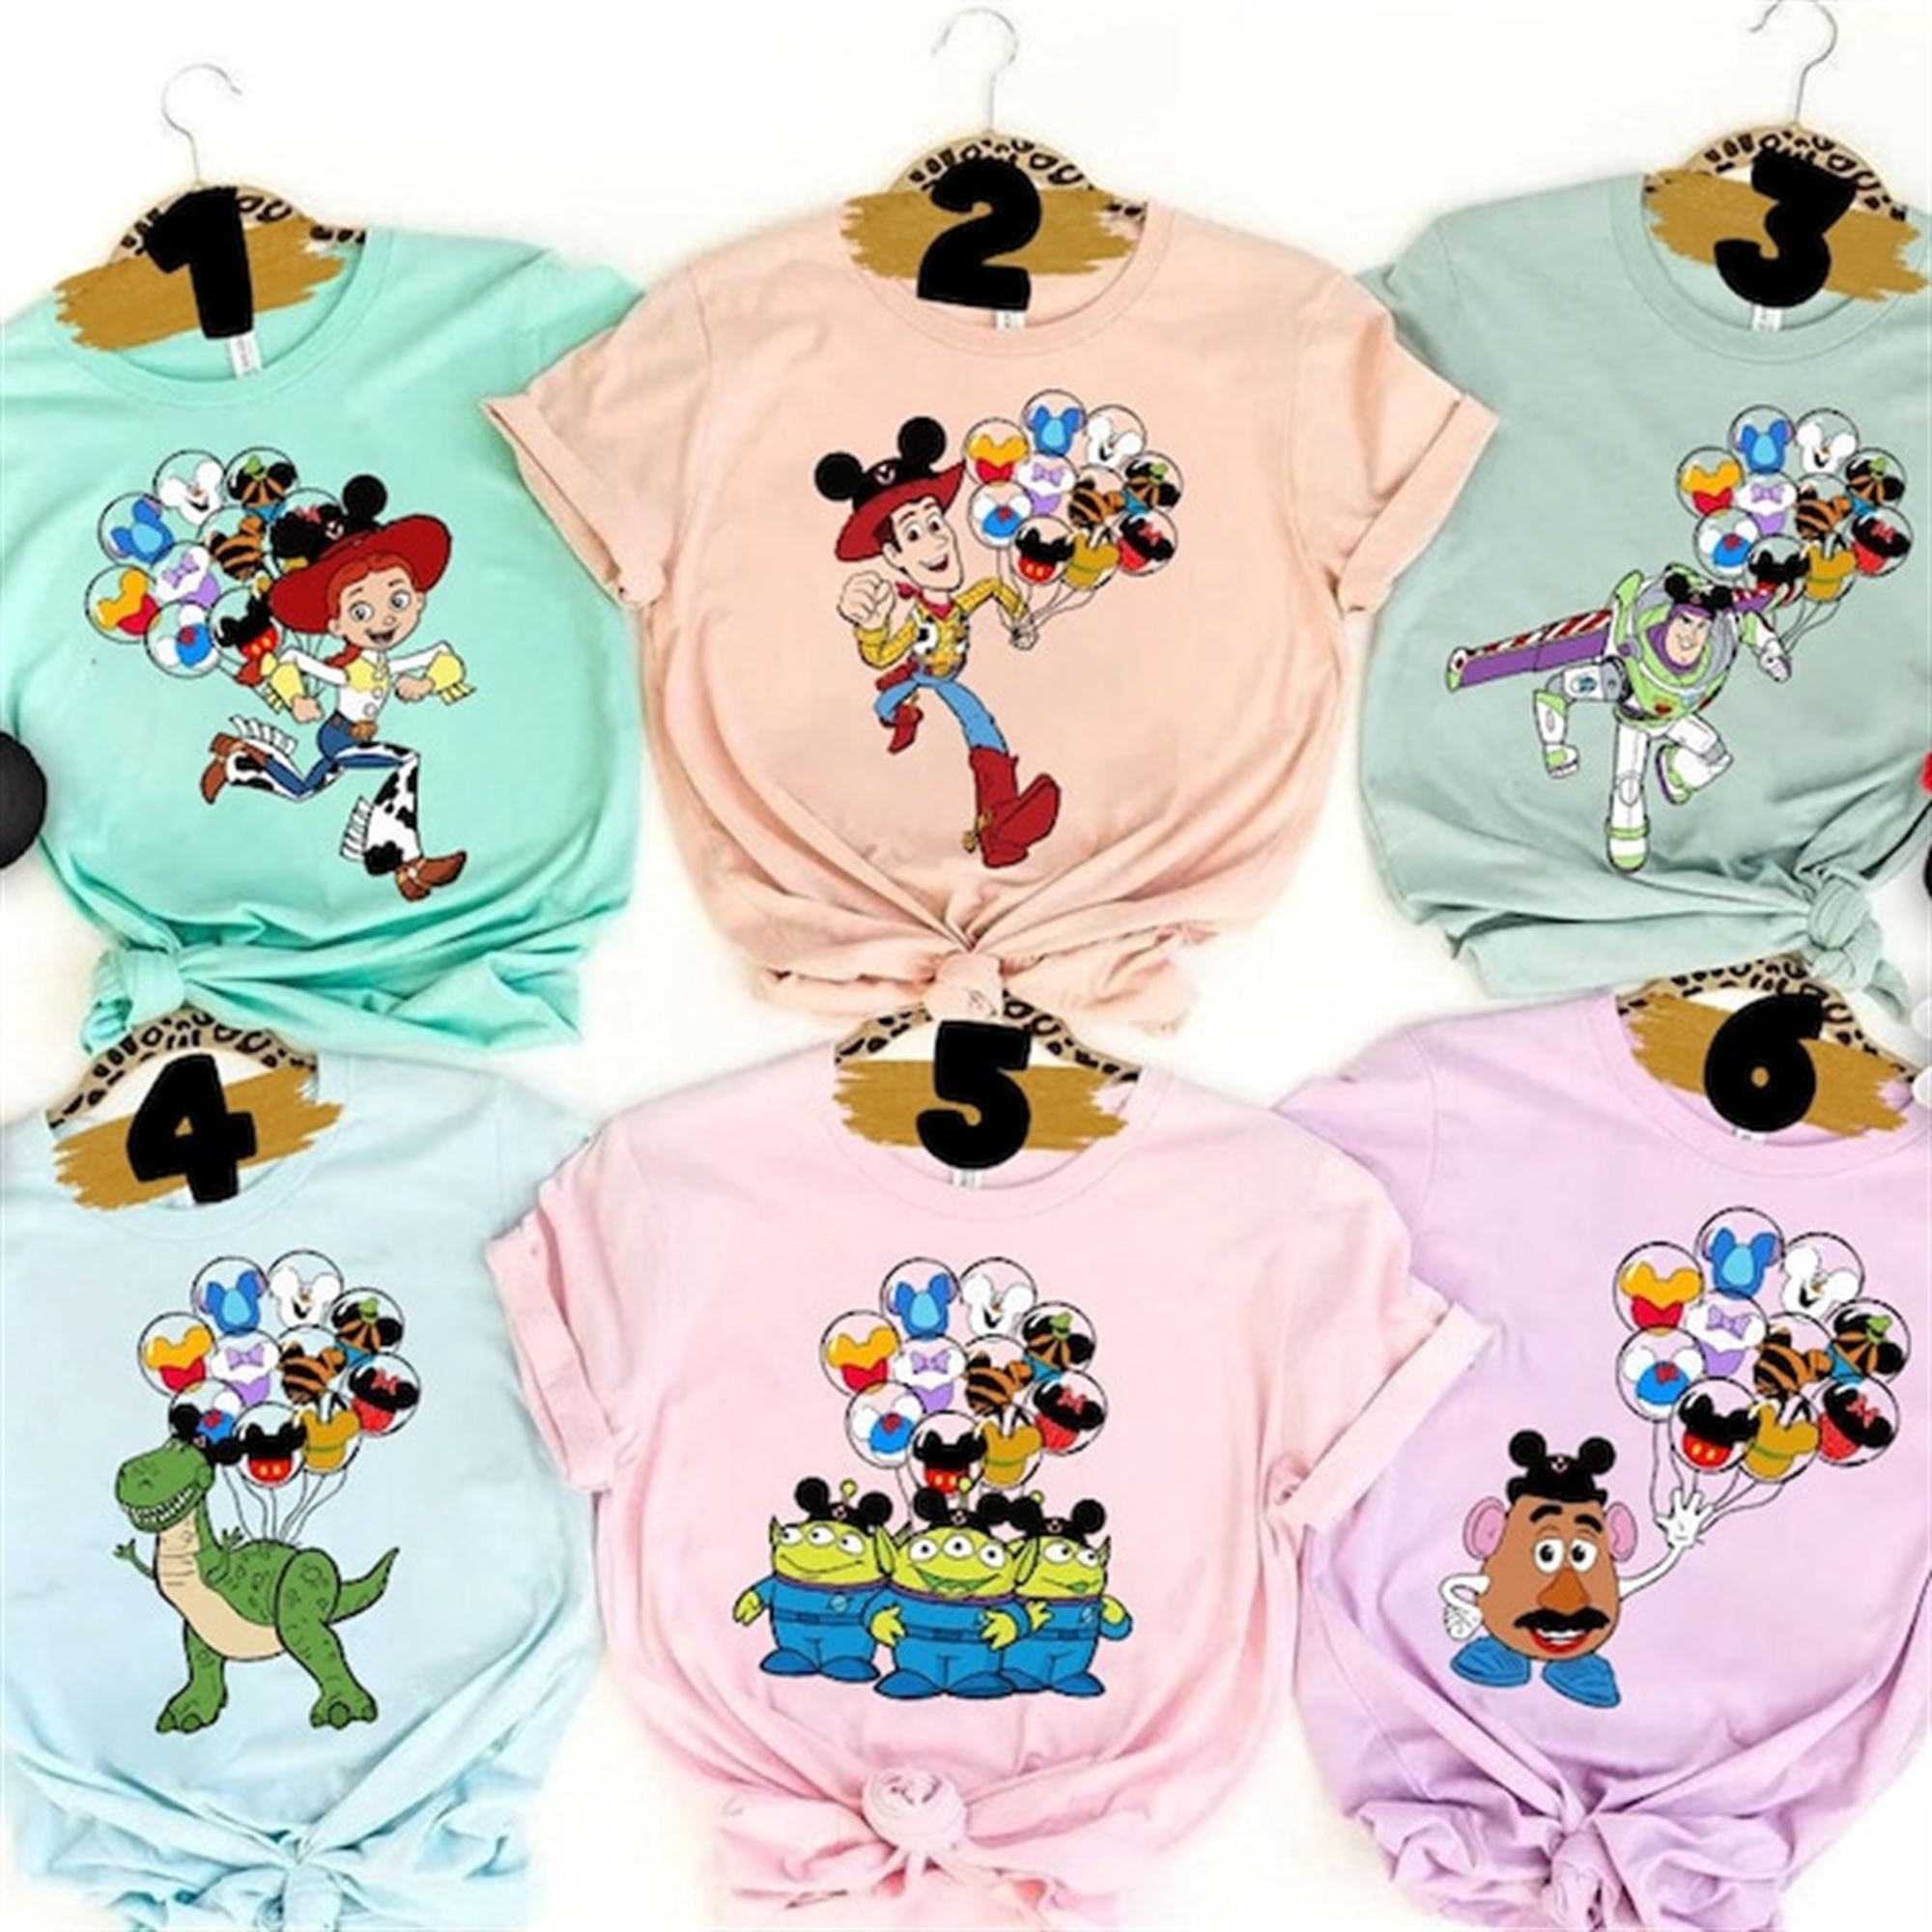 Personalized Toy Story Family Shirts For Disney Trip 